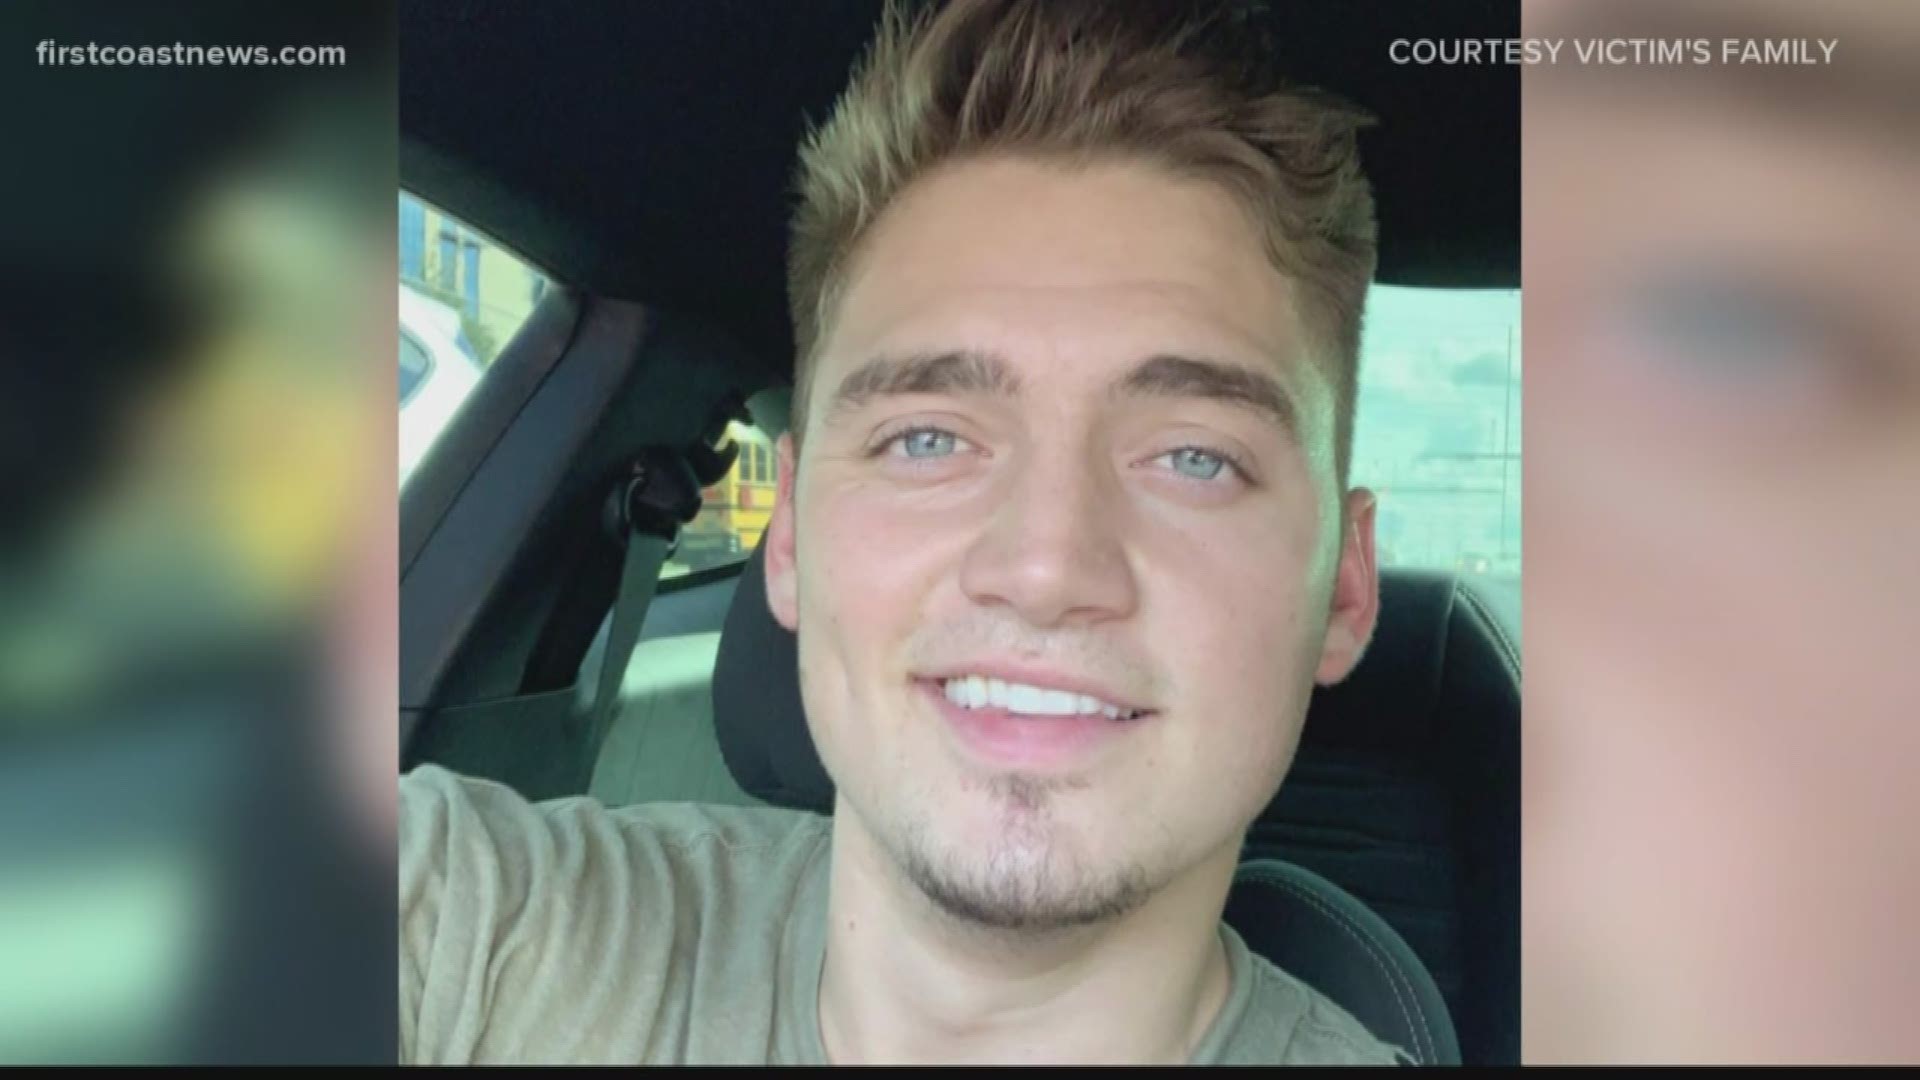 Friends and family of Blake Hendrix want answers after Hendrix was found dead in Riverside.